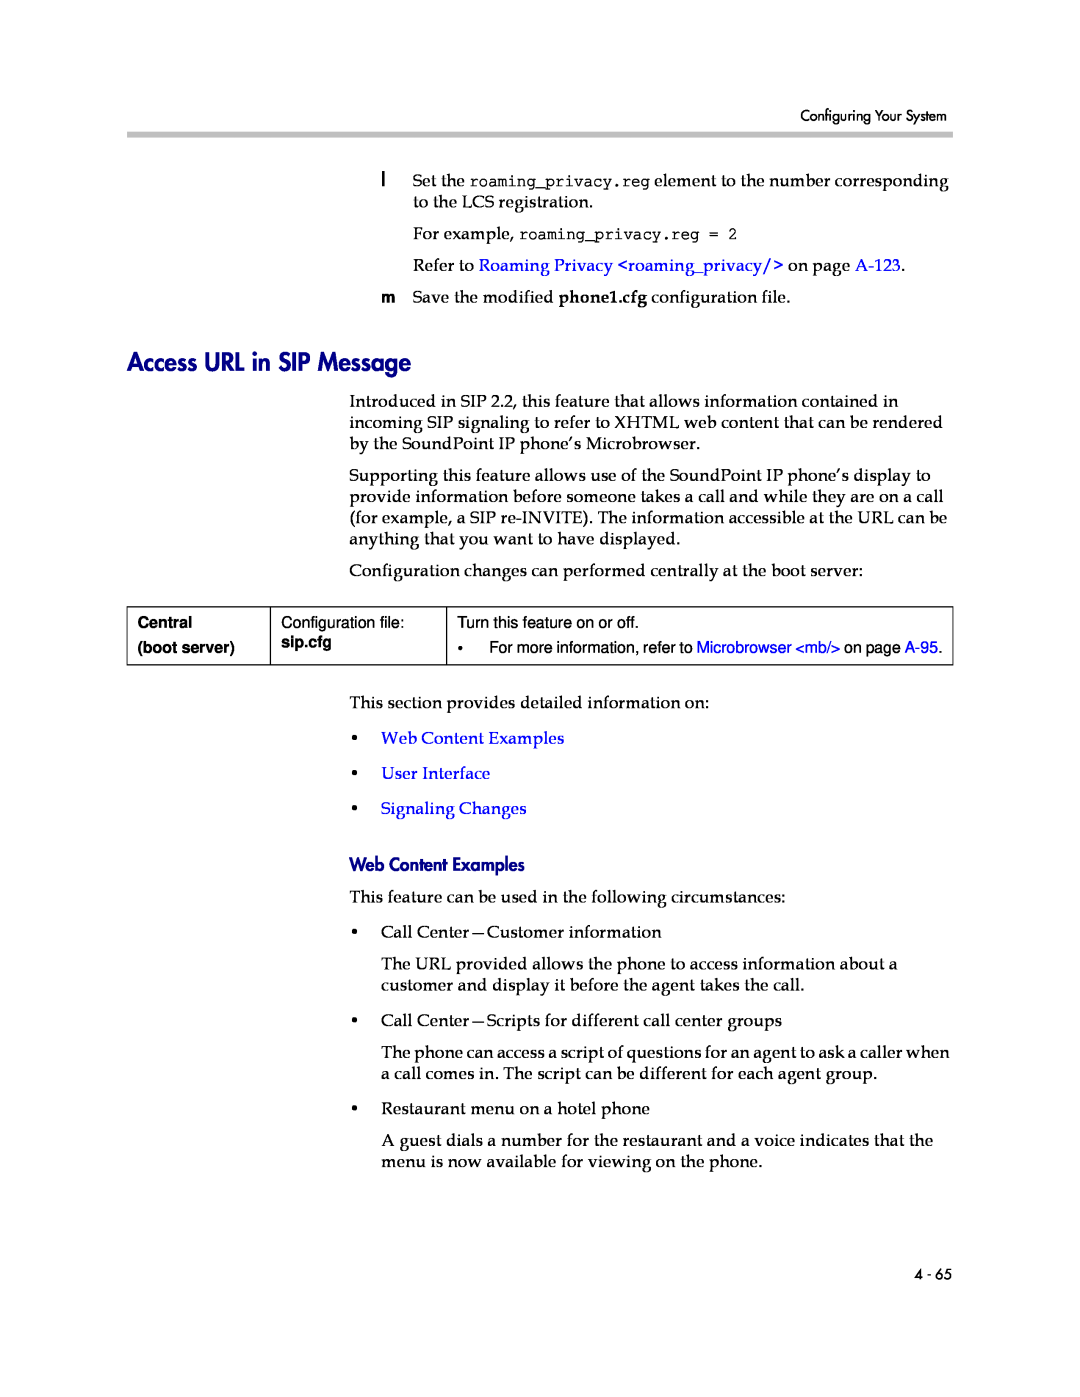 Polycom SIP 3.1 manual Access URL in SIP Message, Web Content Examples User Interface Signaling Changes 